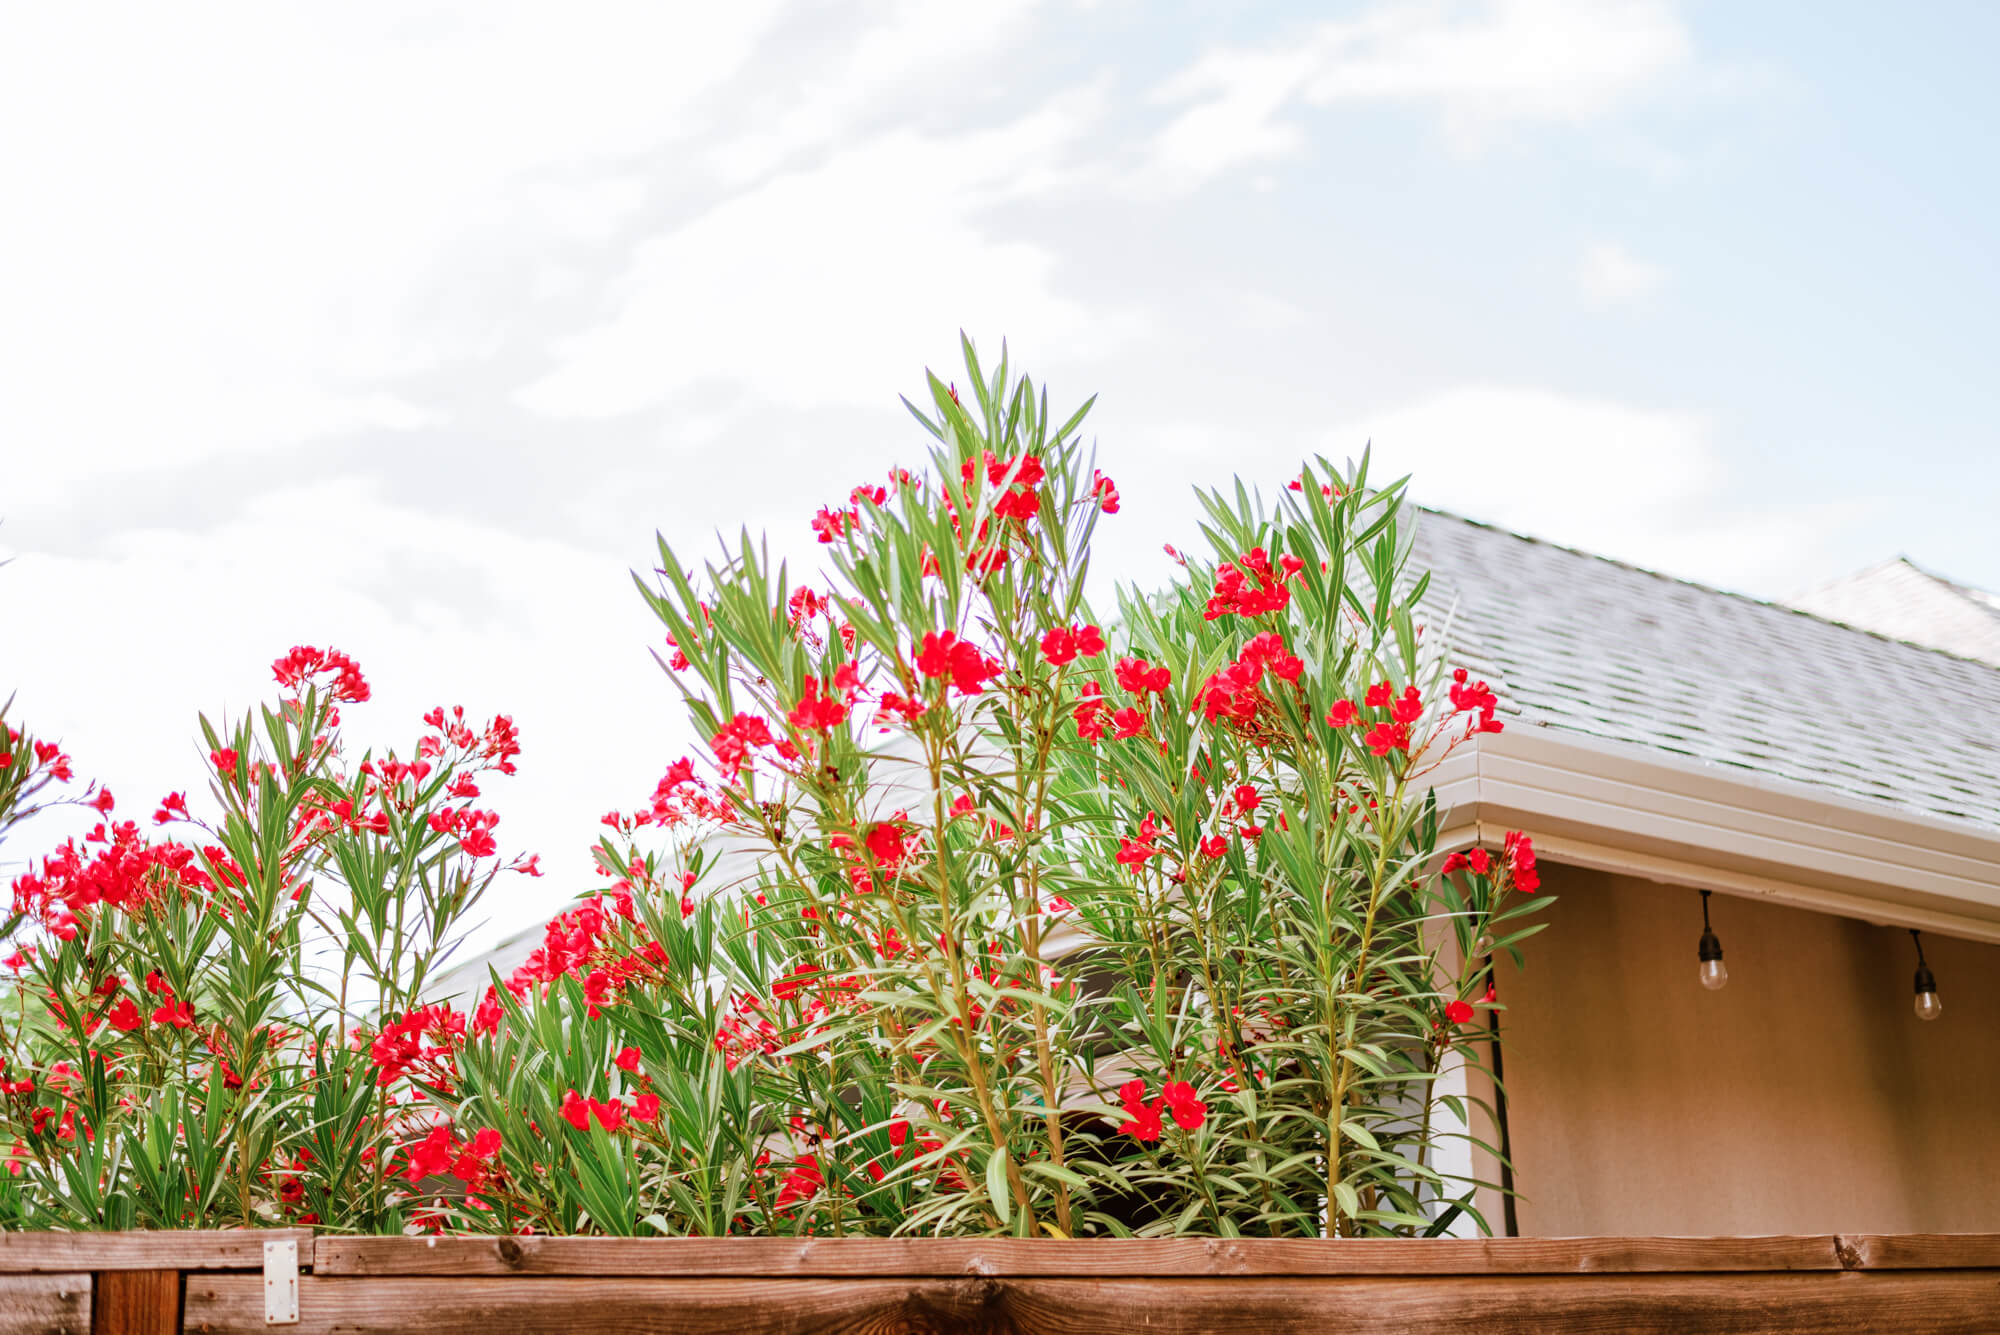 Bright pink flowers reach towards the sky over then neighbor's fence. 